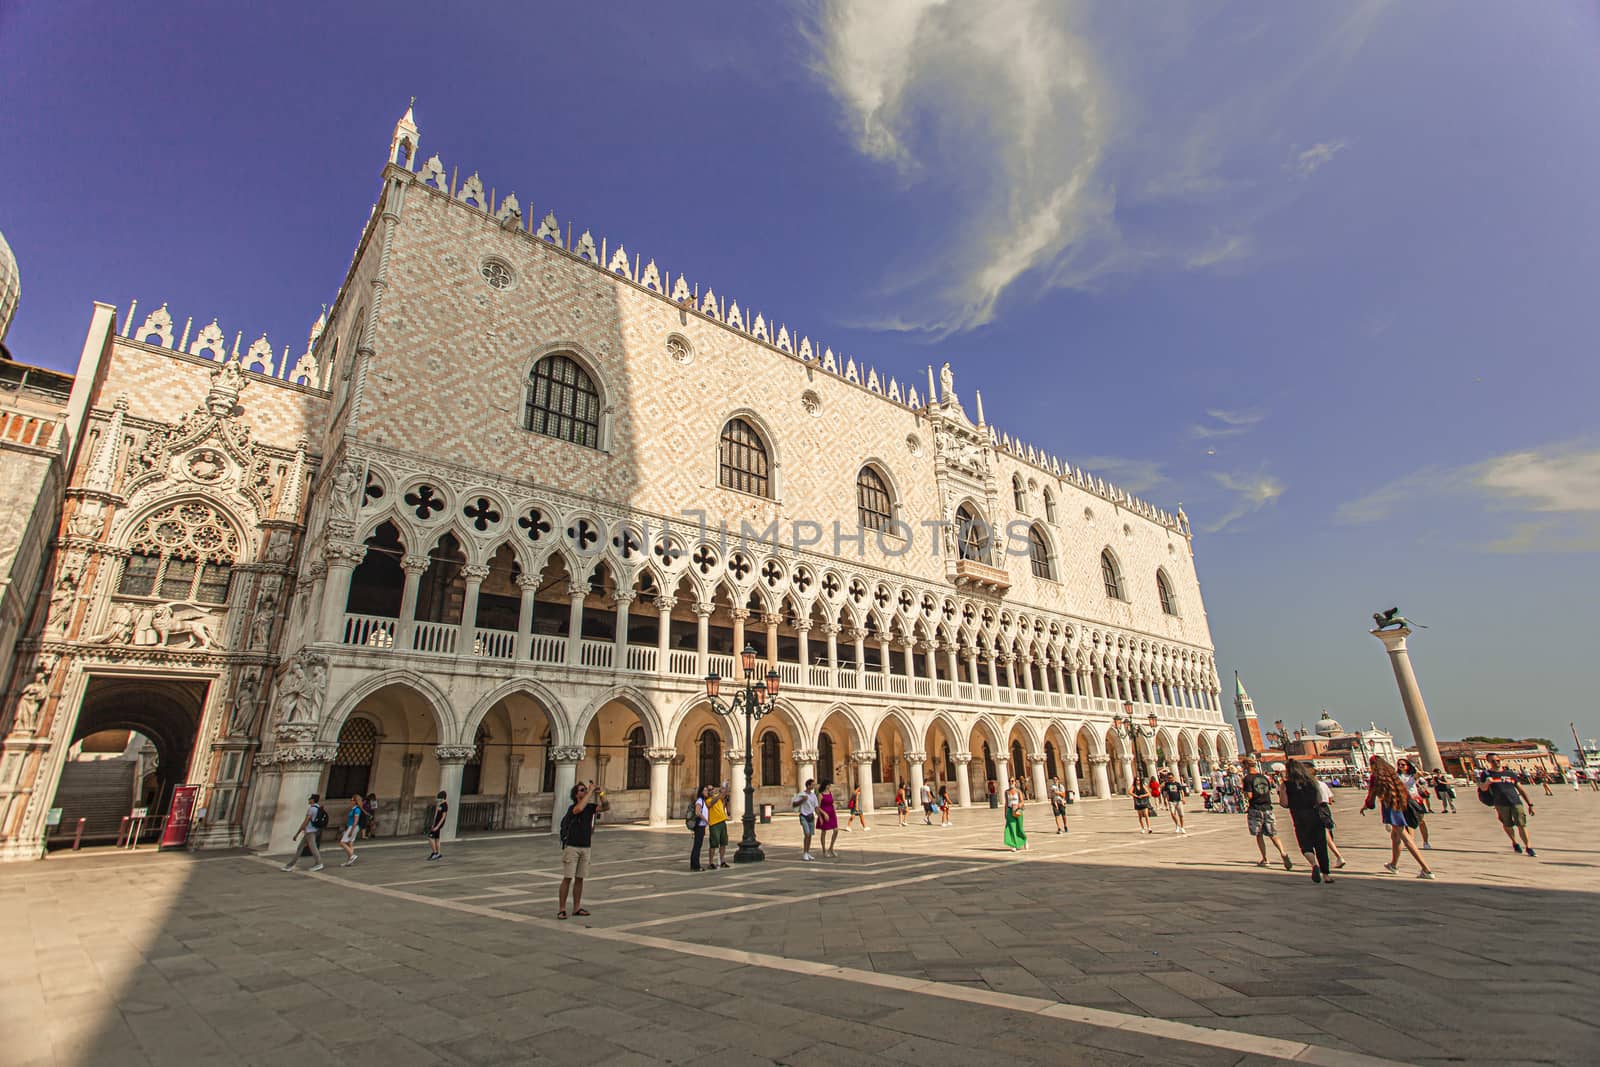 Palazzo Ducale in Venice 3 by pippocarlot